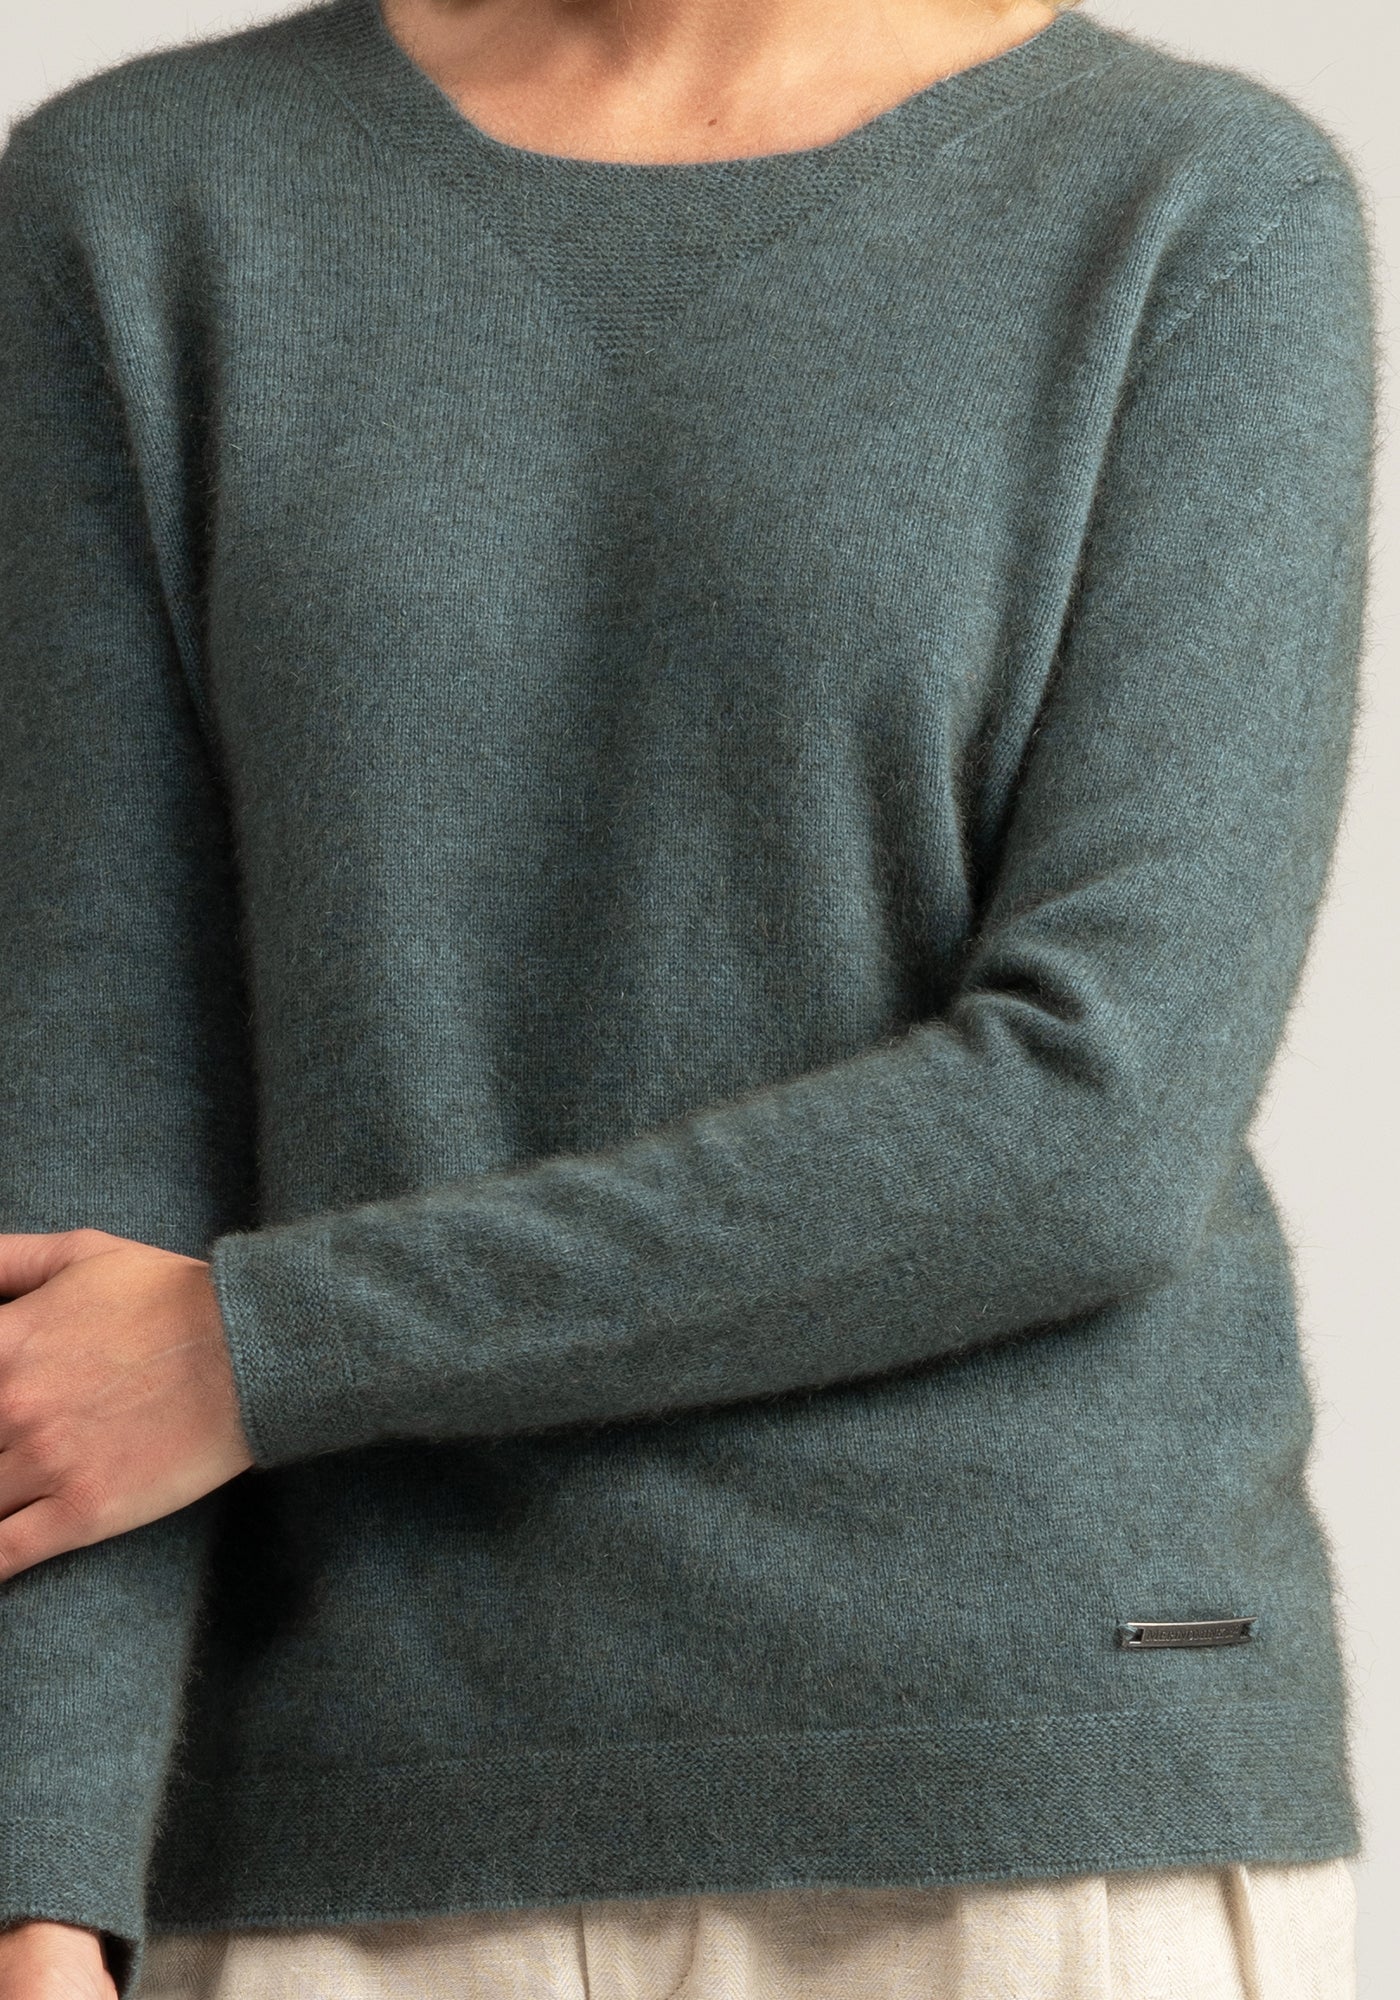 "Upgrade your wardrobe with our grey merino wool sweater. Soft, warm, and timeless. Get yours today!"